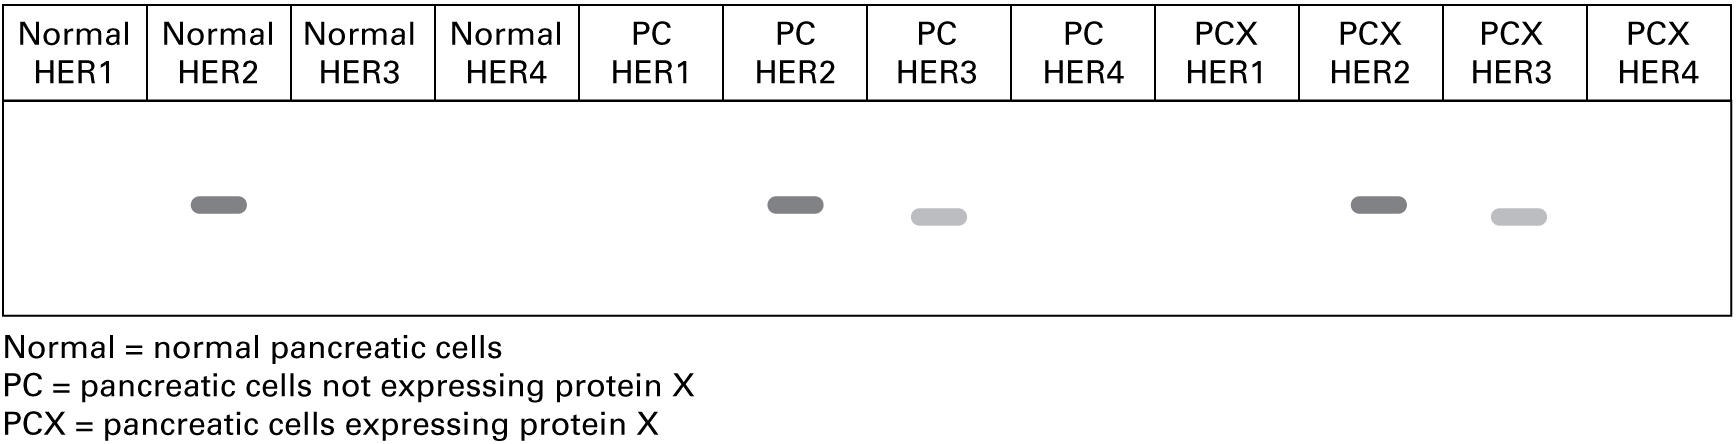 RT-PCR results show the following lanes and bands: Normal pancreatic cells and RT-PCR using primers for HER1: no band Normal pancreatic cells and RT-PCR using primers for HER2: band Normal pancreatic cells and RT-PCR using primers for HER3: no band Normal pancreatic cells and RT-PCR using primers for HER4: no band Pancreatic cells not expressing protein X and RT-PCR using primers for HER1: no band Pancreatic cells not expressing protein X and RT-PCR using primers for HER2: band Pancreatic cells not expressing protein X and RT-PCR using primers for HER3: band Pancreatic cells not expressing protein X and RT-PCR using primers for HER4: no band Pancreatic cells expressing protein X and RT-PCR using primers for HER1: no band Pancreatic cells expressing protein X and RT-PCR using primers for HER2: band Pancreatic cells expressing protein X and RT-PCR using primers for HER3: band Pancreatic cells expressing protein X and RT-PCR using primers for HER4: no band 